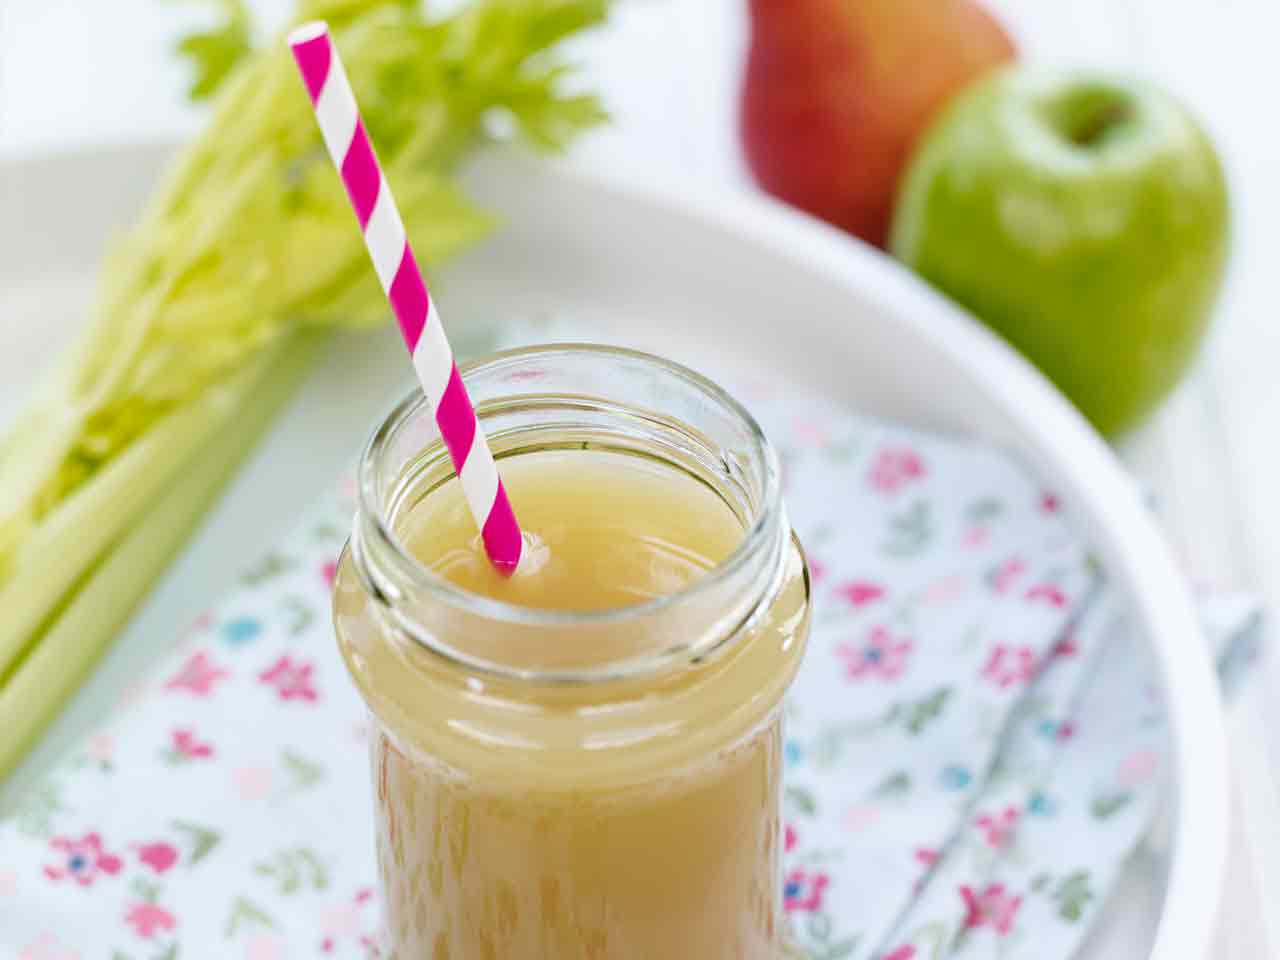 Pear, ginger and celery juice